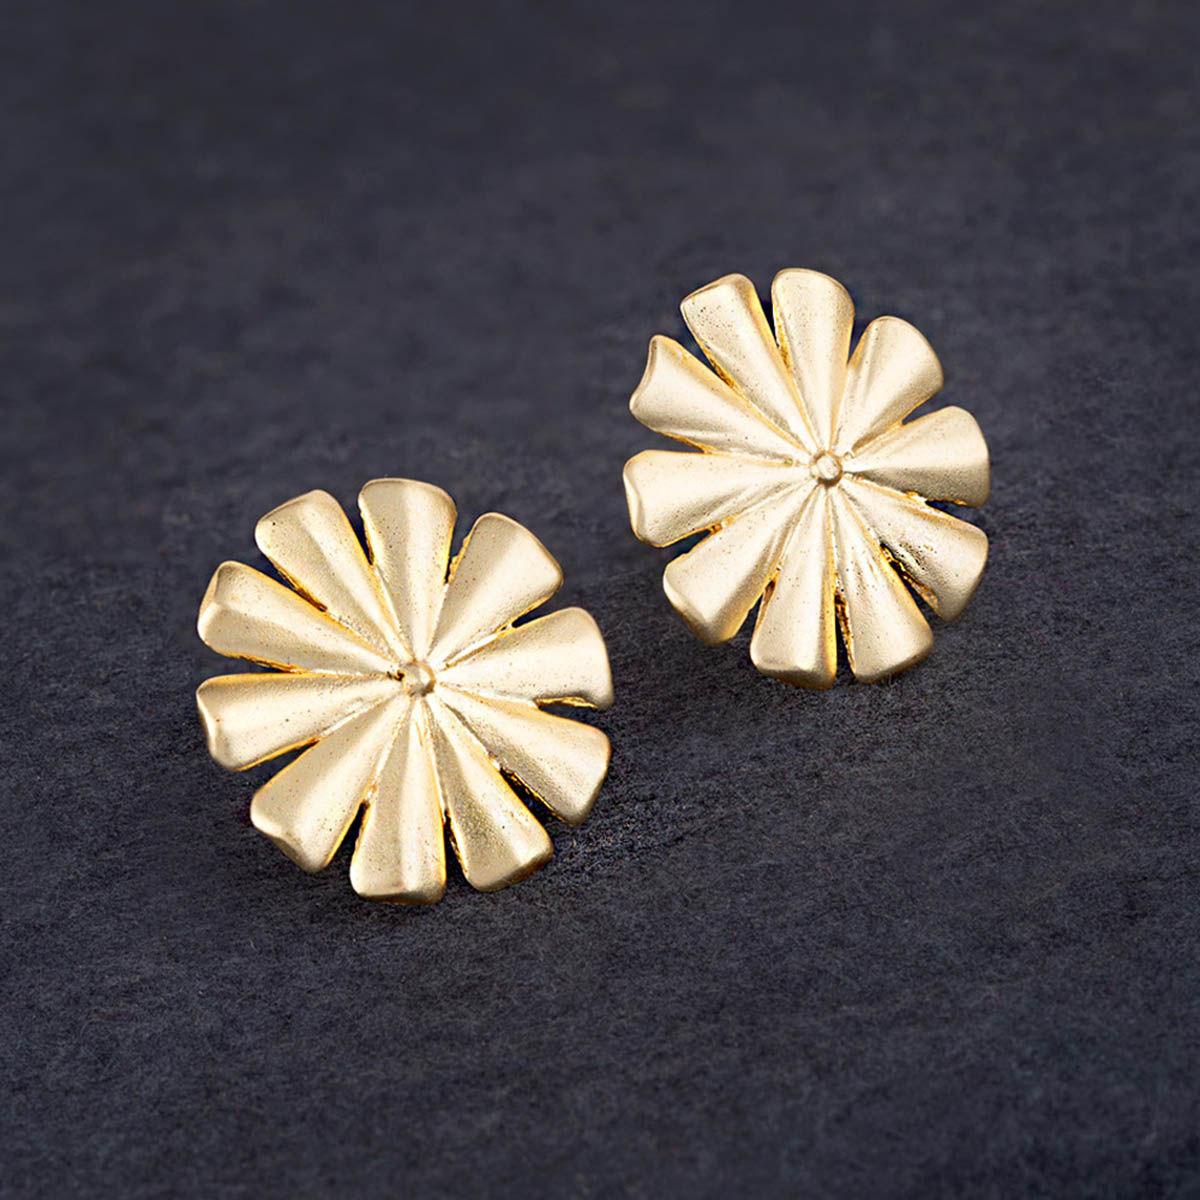 Voylla Round Gold Plated Earrings: Buy 